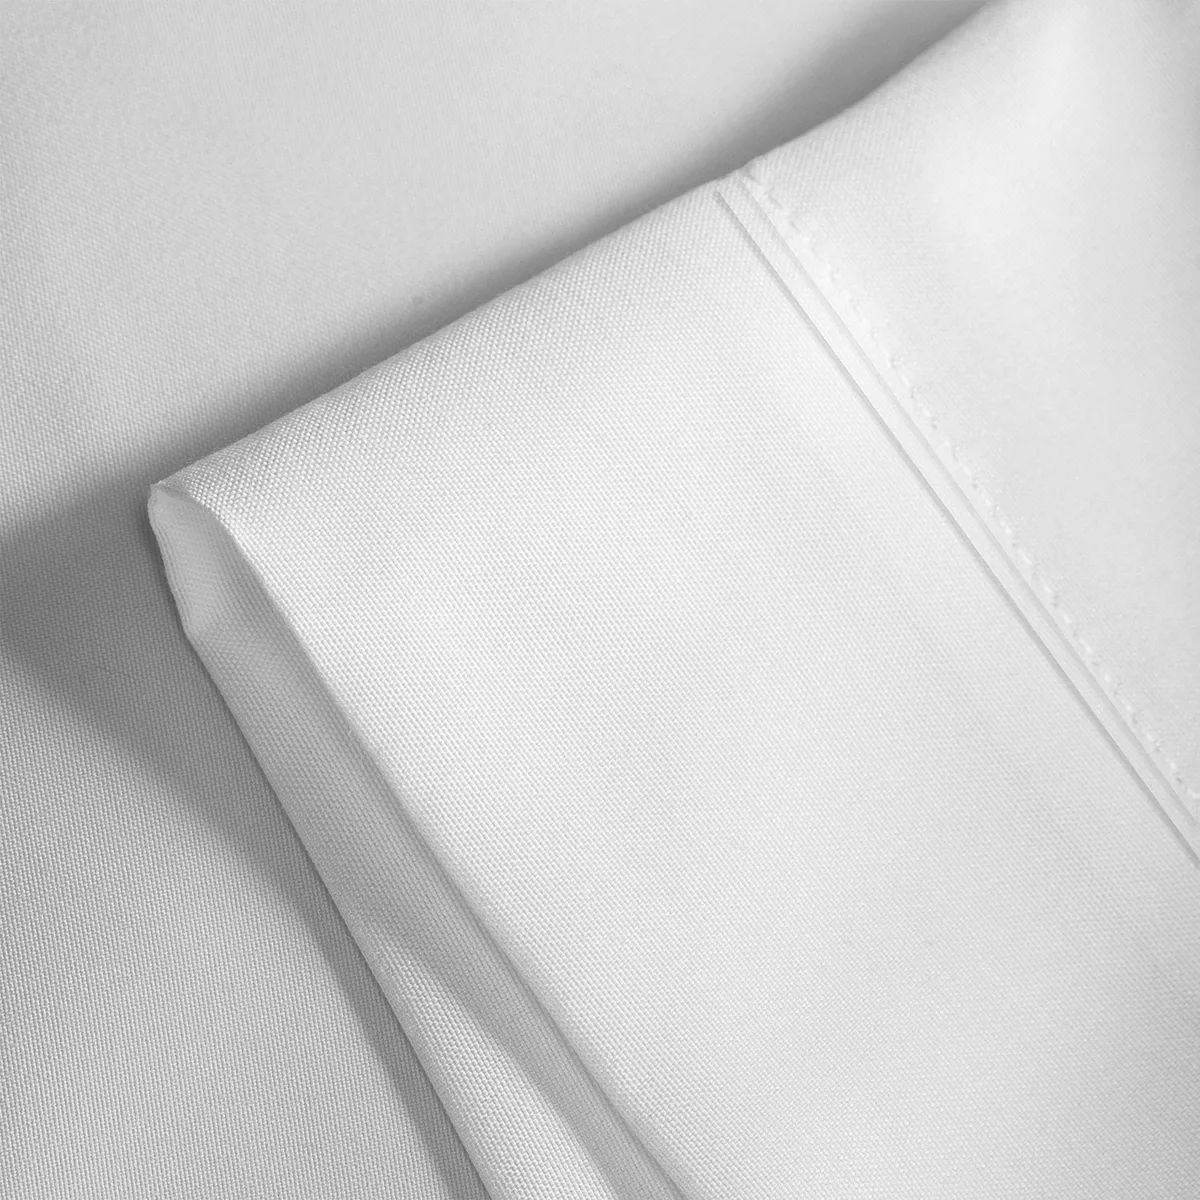 Purity Home 300 Thread Count Organic Cotton Percale Sheet Set with Pillowcases | Kohl's